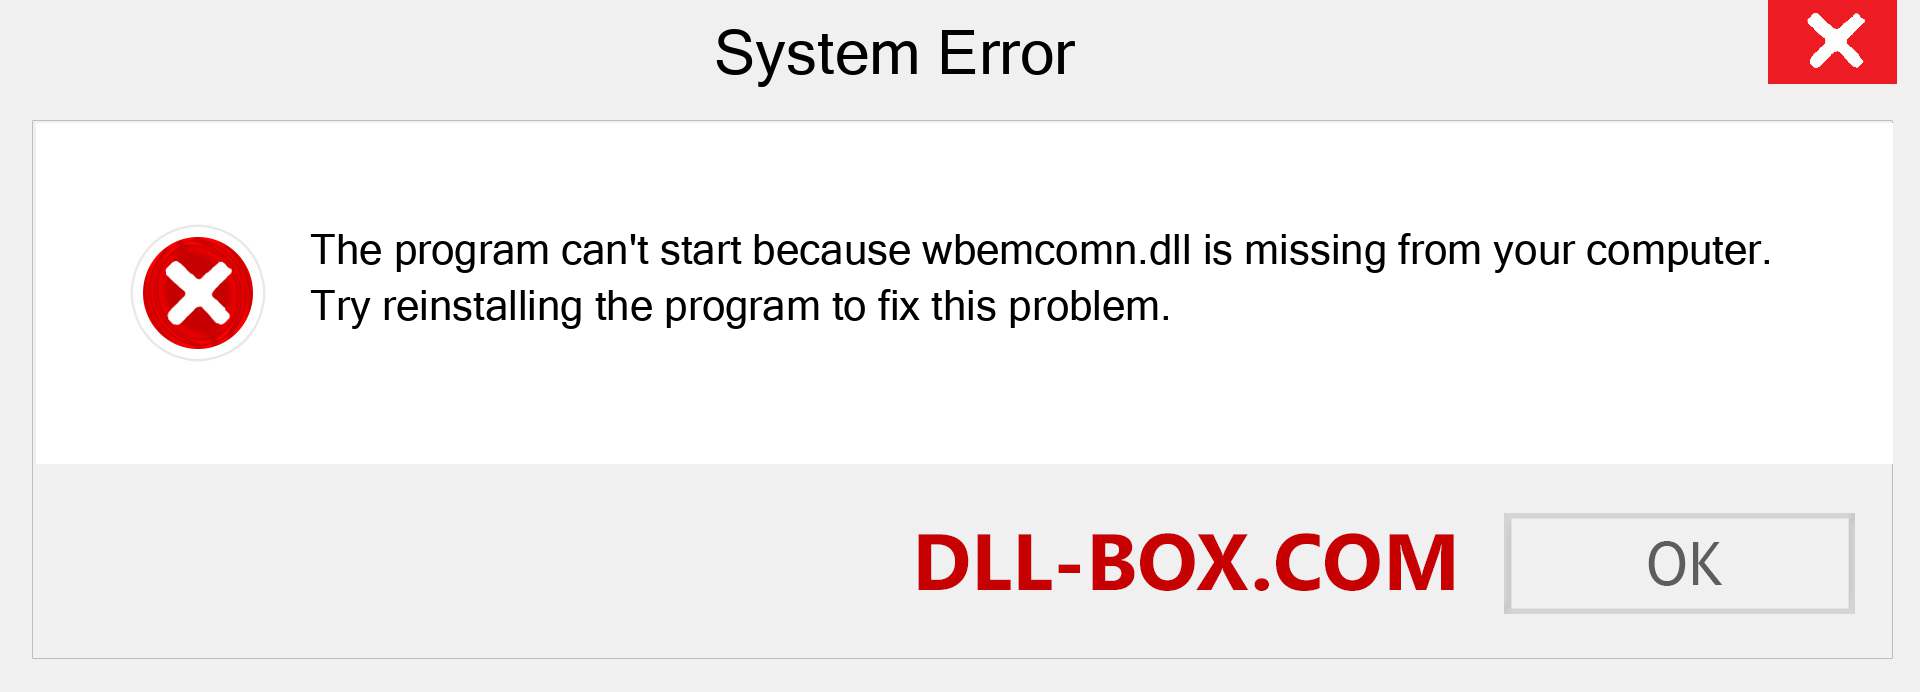  wbemcomn.dll file is missing?. Download for Windows 7, 8, 10 - Fix  wbemcomn dll Missing Error on Windows, photos, images